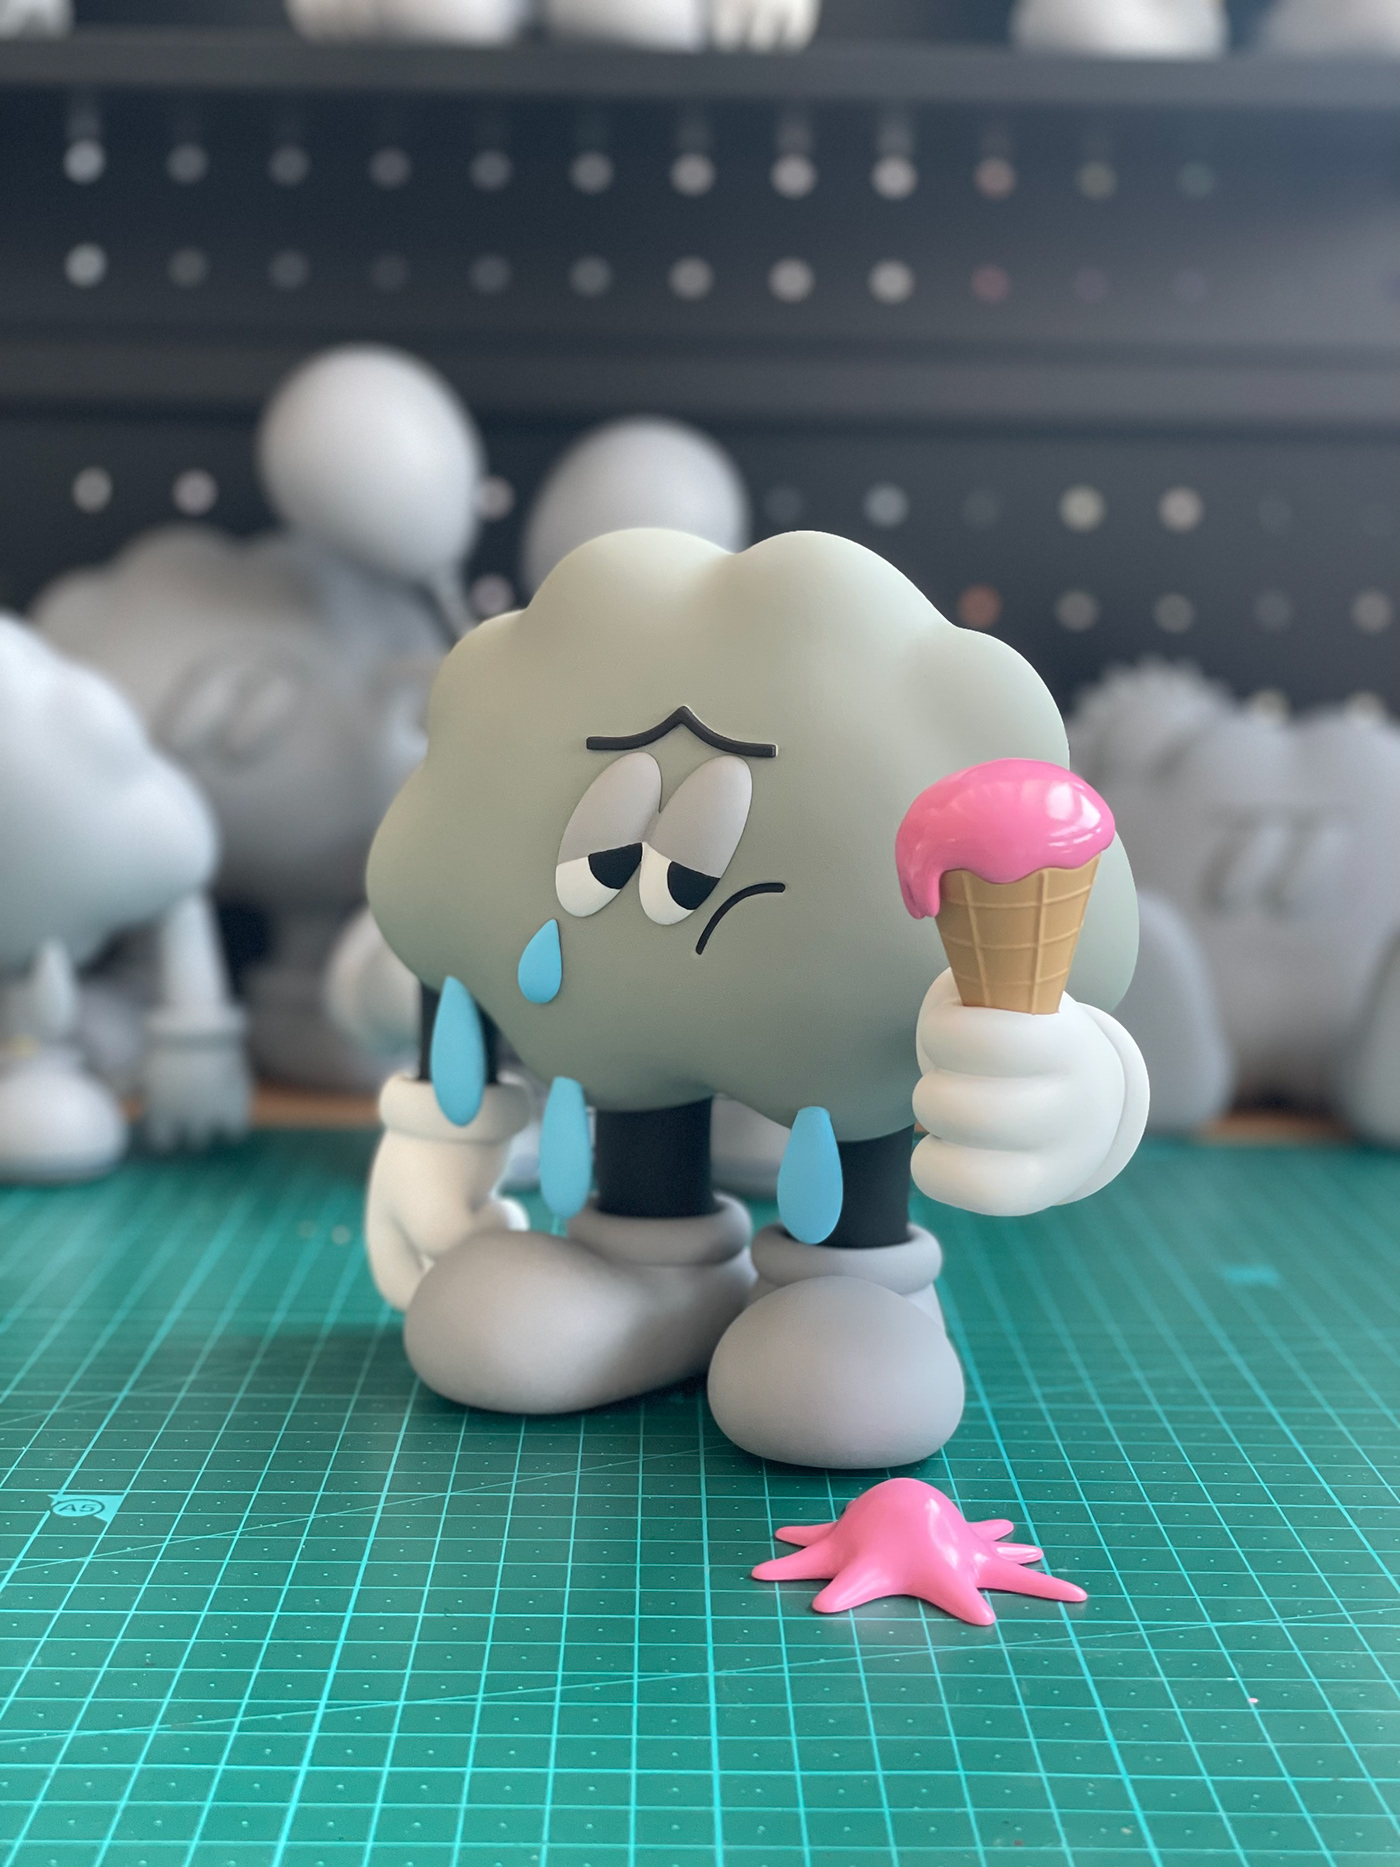 art toy arttoy designertoy resintoy Collection 3dmodeling rendering clouds emotion Character ice cream artworks